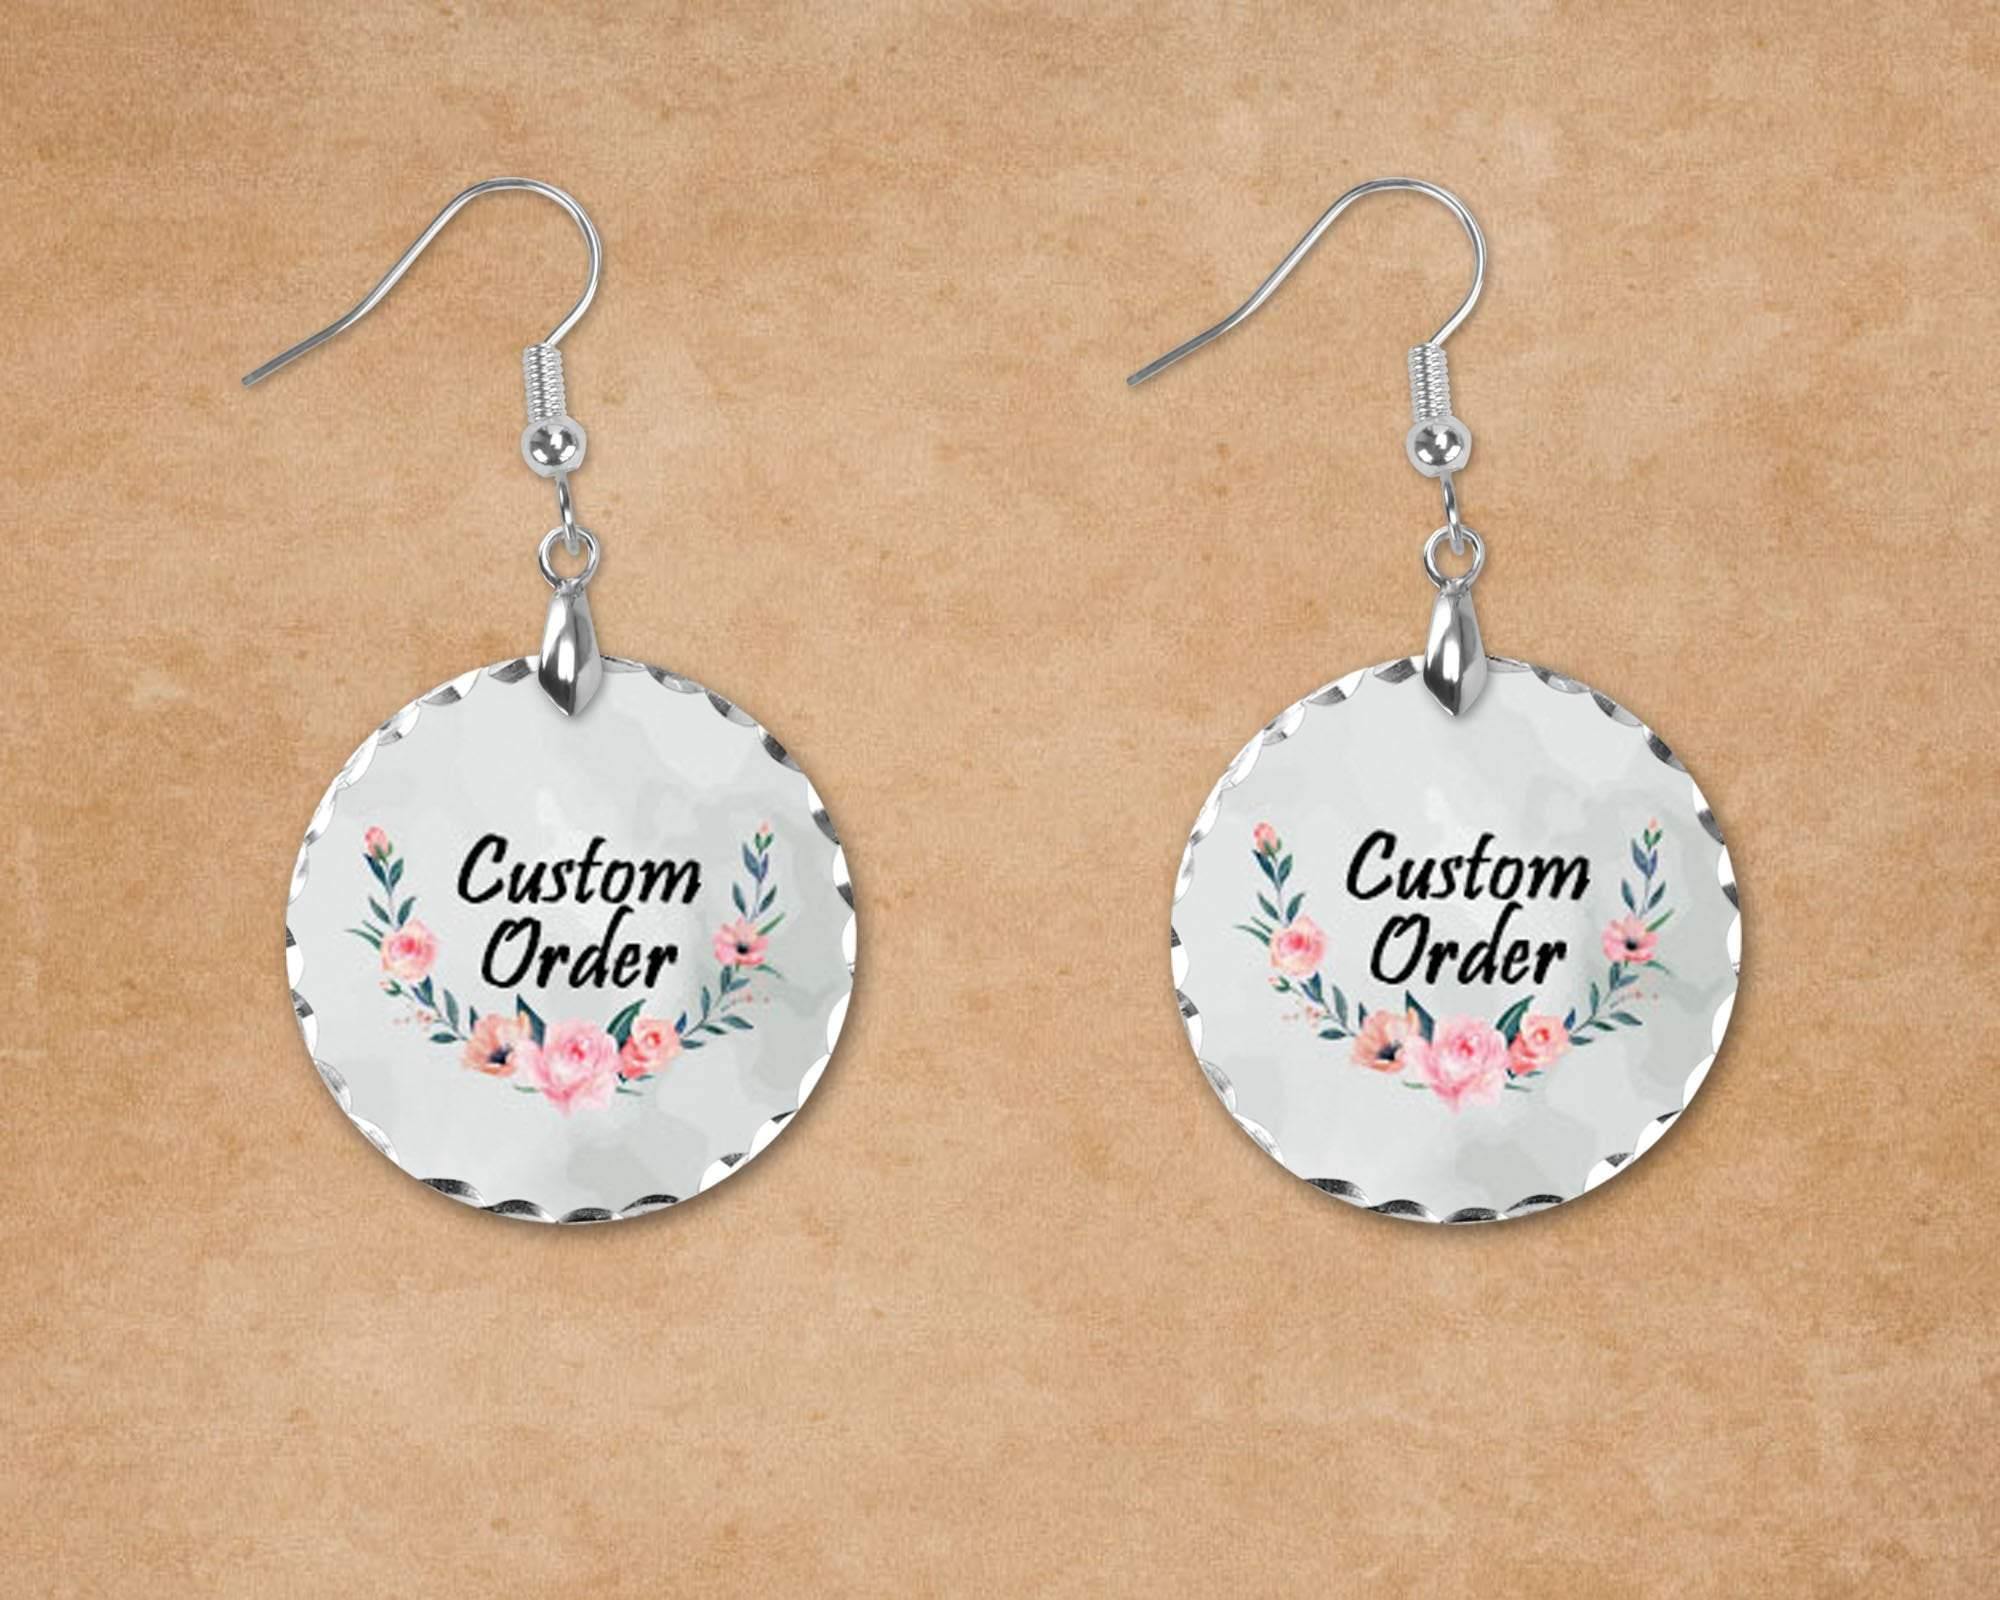 Custom Jewelry | Personalized Jewelry | Scalloped Charm Earrings | Custom Order - This & That Solutions - Custom Jewelry | Personalized Jewelry | Scalloped Charm Earrings | Custom Order - Personalized Gifts & Custom Home Decor